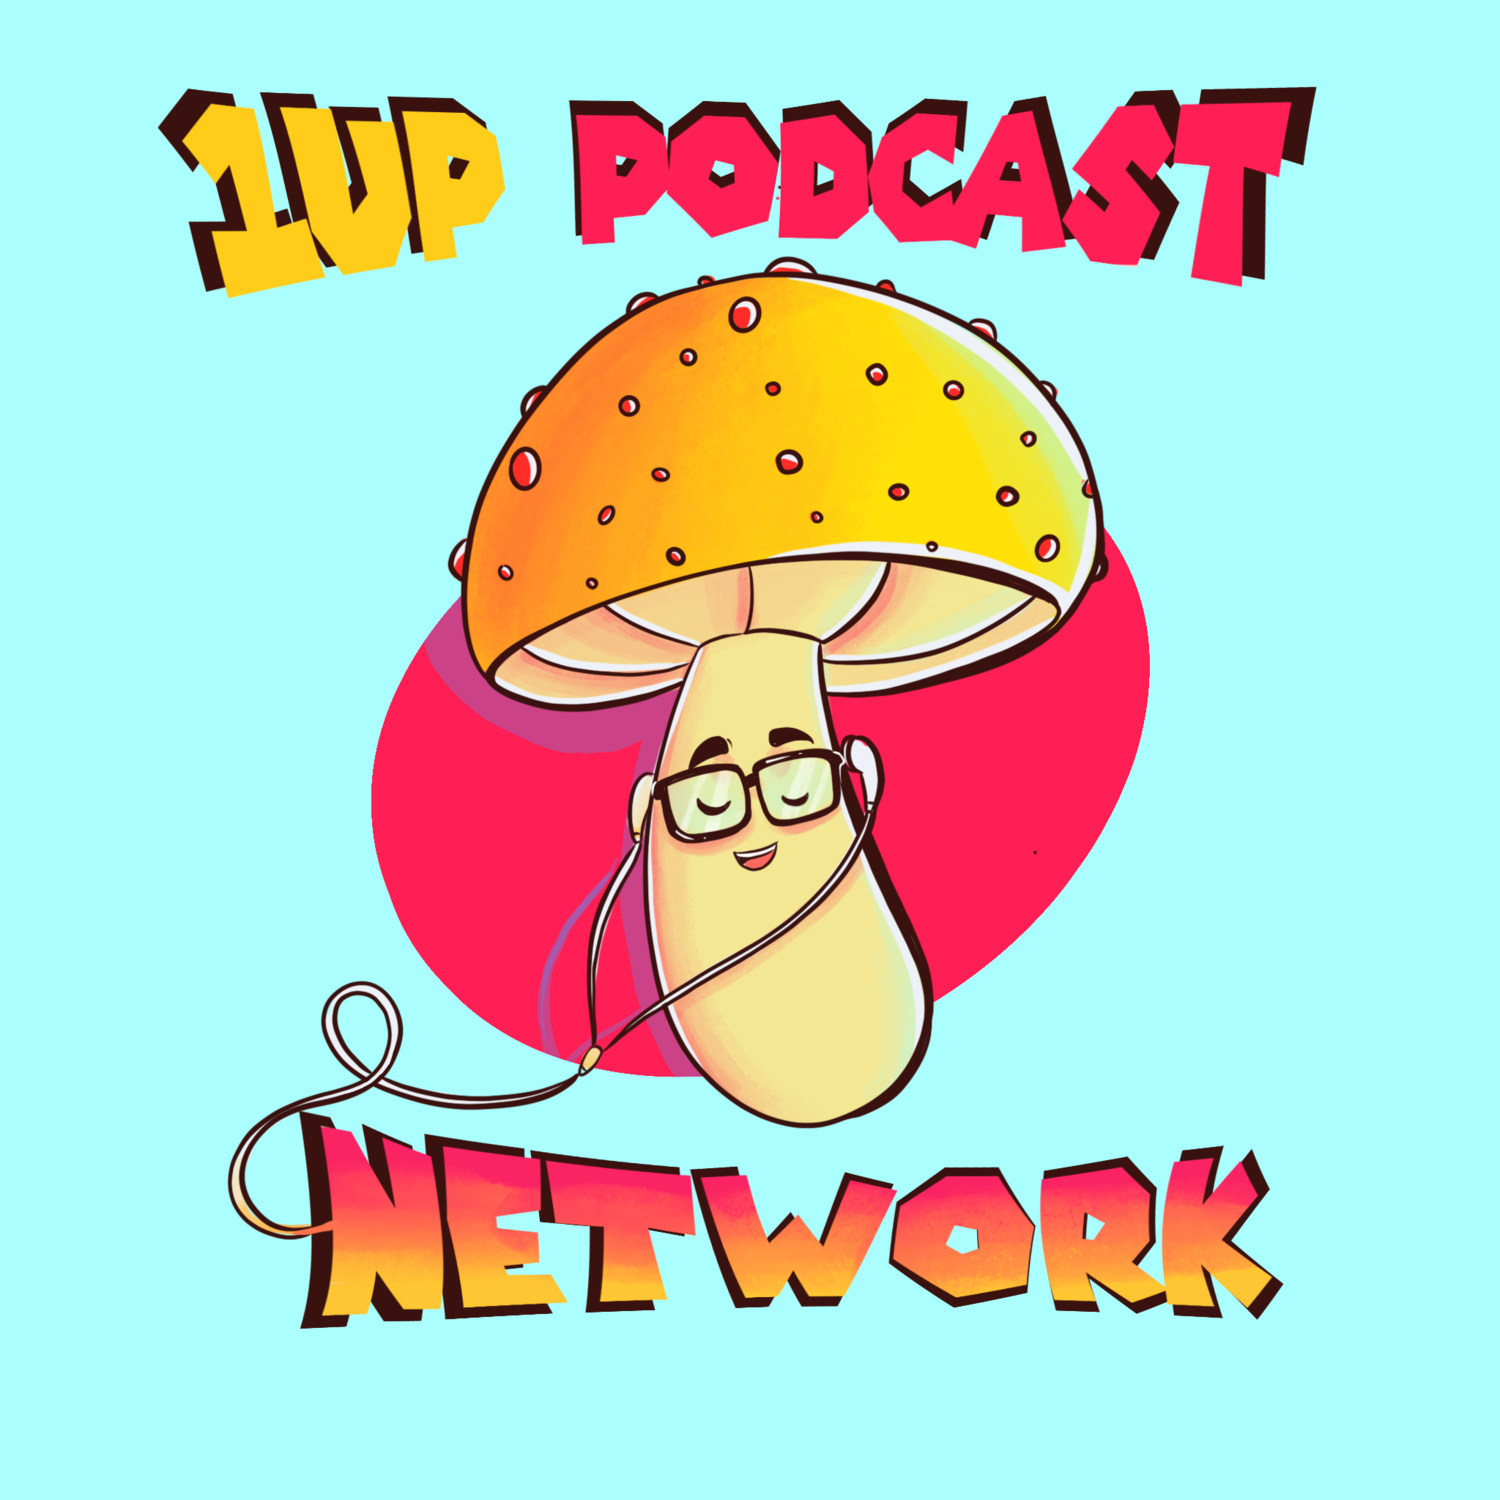 1up Podcast Network